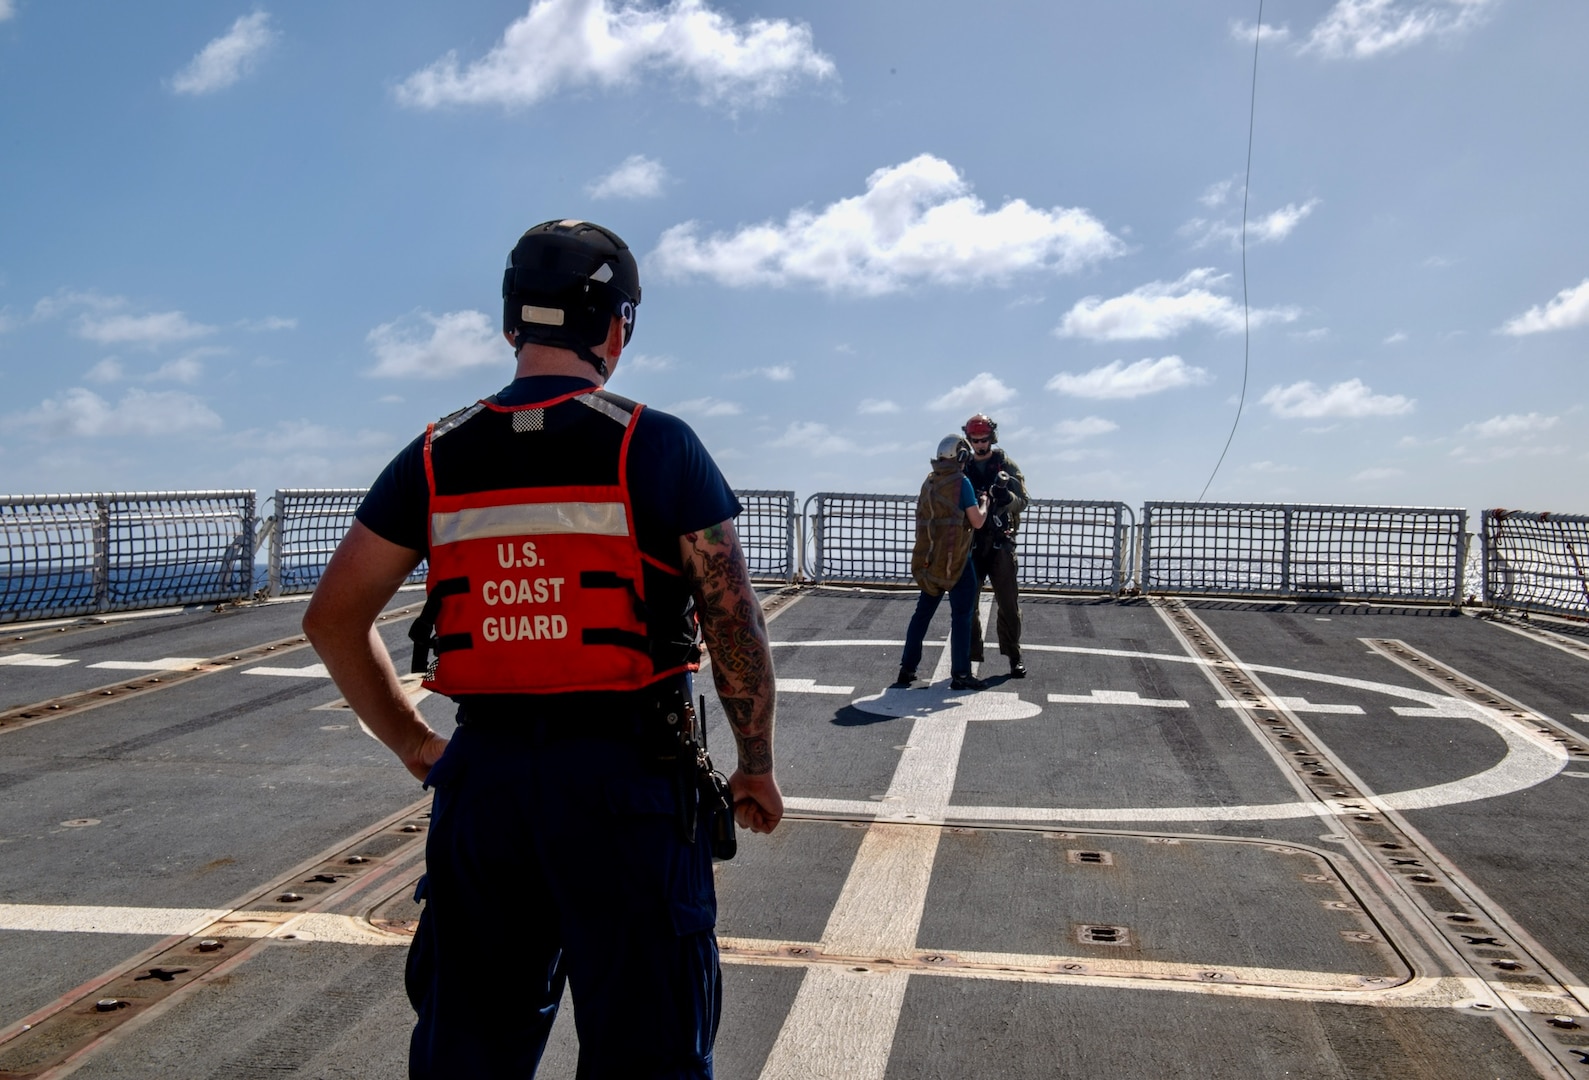 On March 6, 2024, the U.S. Coast Guard and U.S. Navy's Helicopter Sea Combat Squadron 25 (HSC-25) effectively evacuated a U.S. Coast Guard member from the USCGC Polar Star (WAGB 10), 100 nautical miles south of Guam, in a joint effort.  The incident began on March 5, when the Joint Rescue Sub-Center (JRSC) Guam received a communication from the Polar Star crew regarding a 43-year-old man aboard experiencing severe abdominal pain. Recognizing the need for urgent medical attention beyond the capabilities available on ship, watchstanders directed the cutter to reroute closer to Guam and initiate a medical evacuation. (U.S. Coast Guard photo by Petty Officer 2nd Class Ryan Graves)